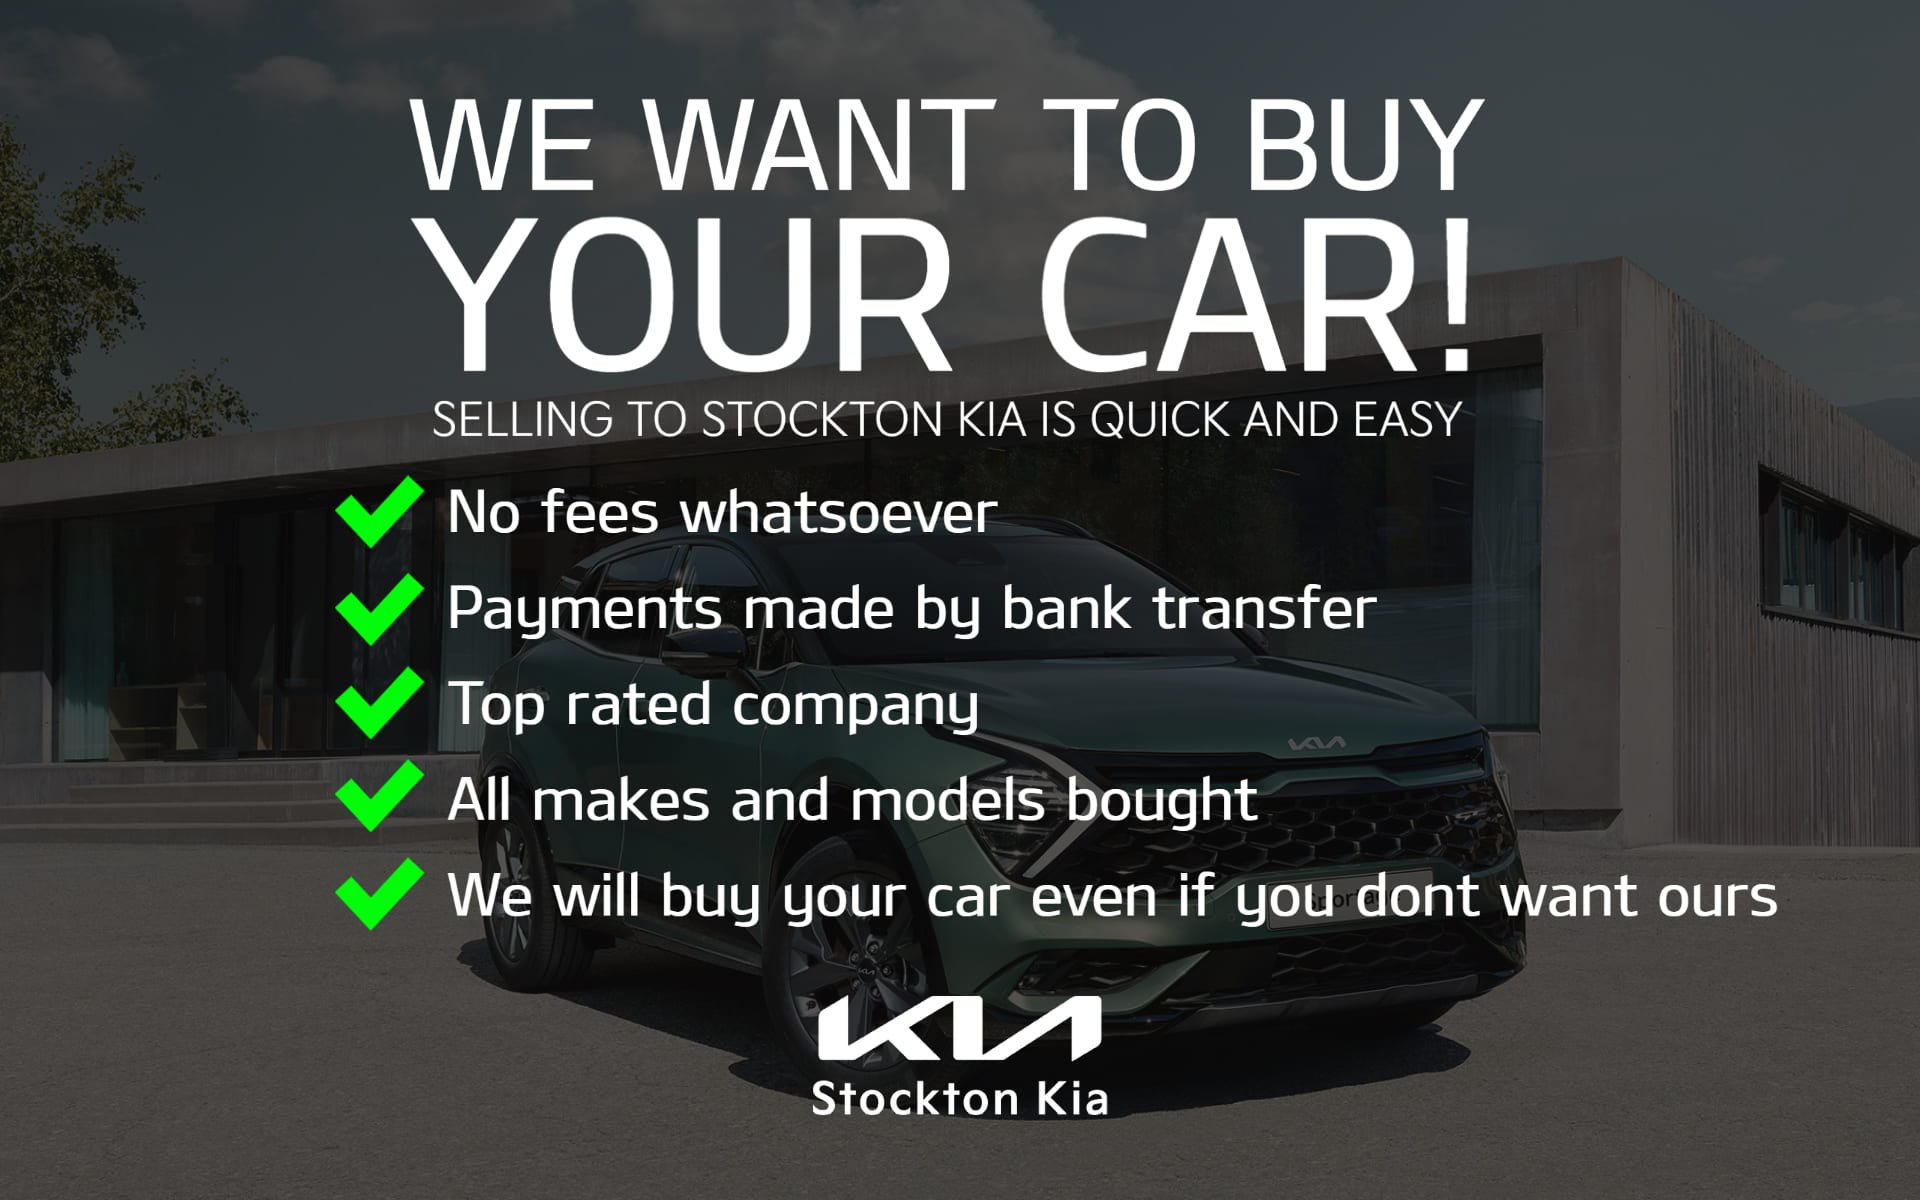 We want your car